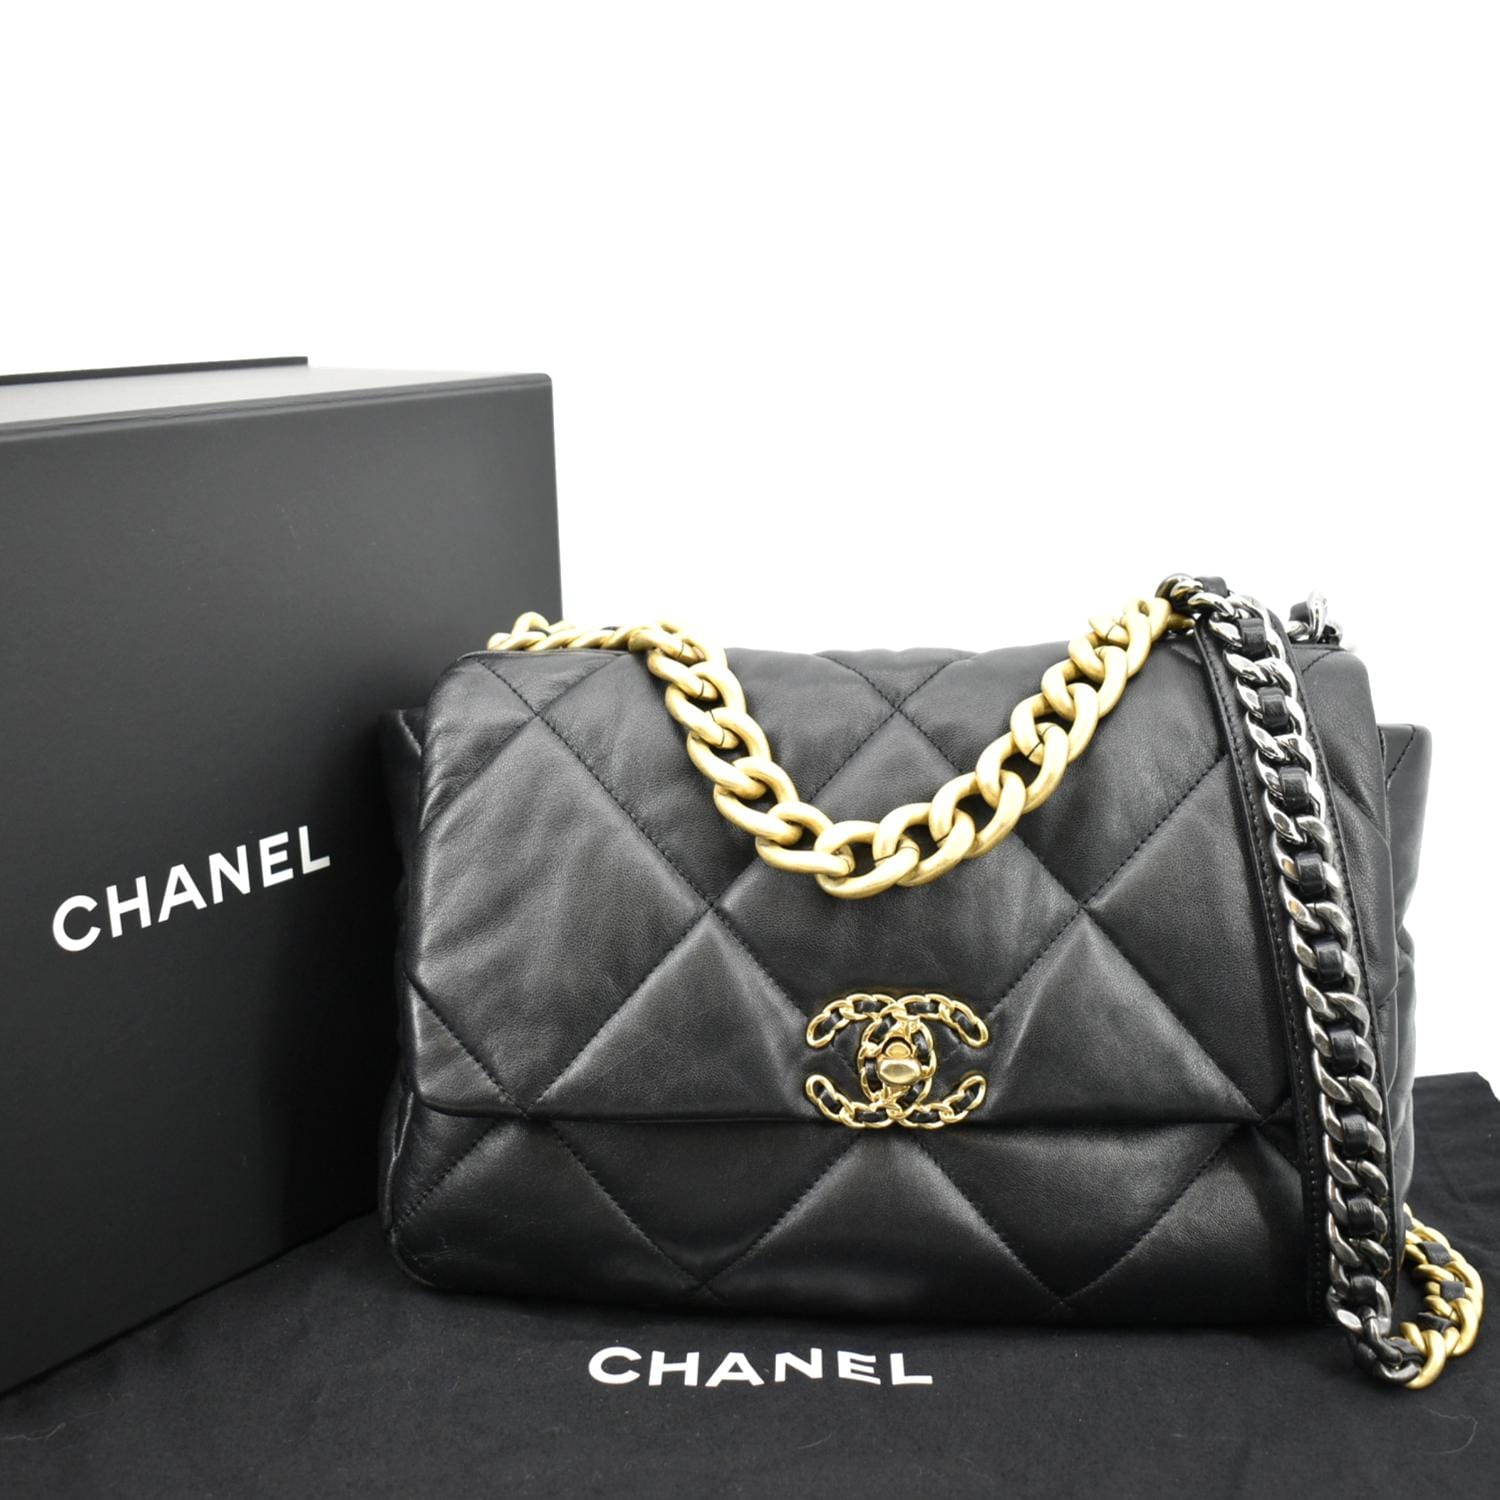 CHANEL, Bags, Chanel Holiday Set 222 Red Makeup Pouch